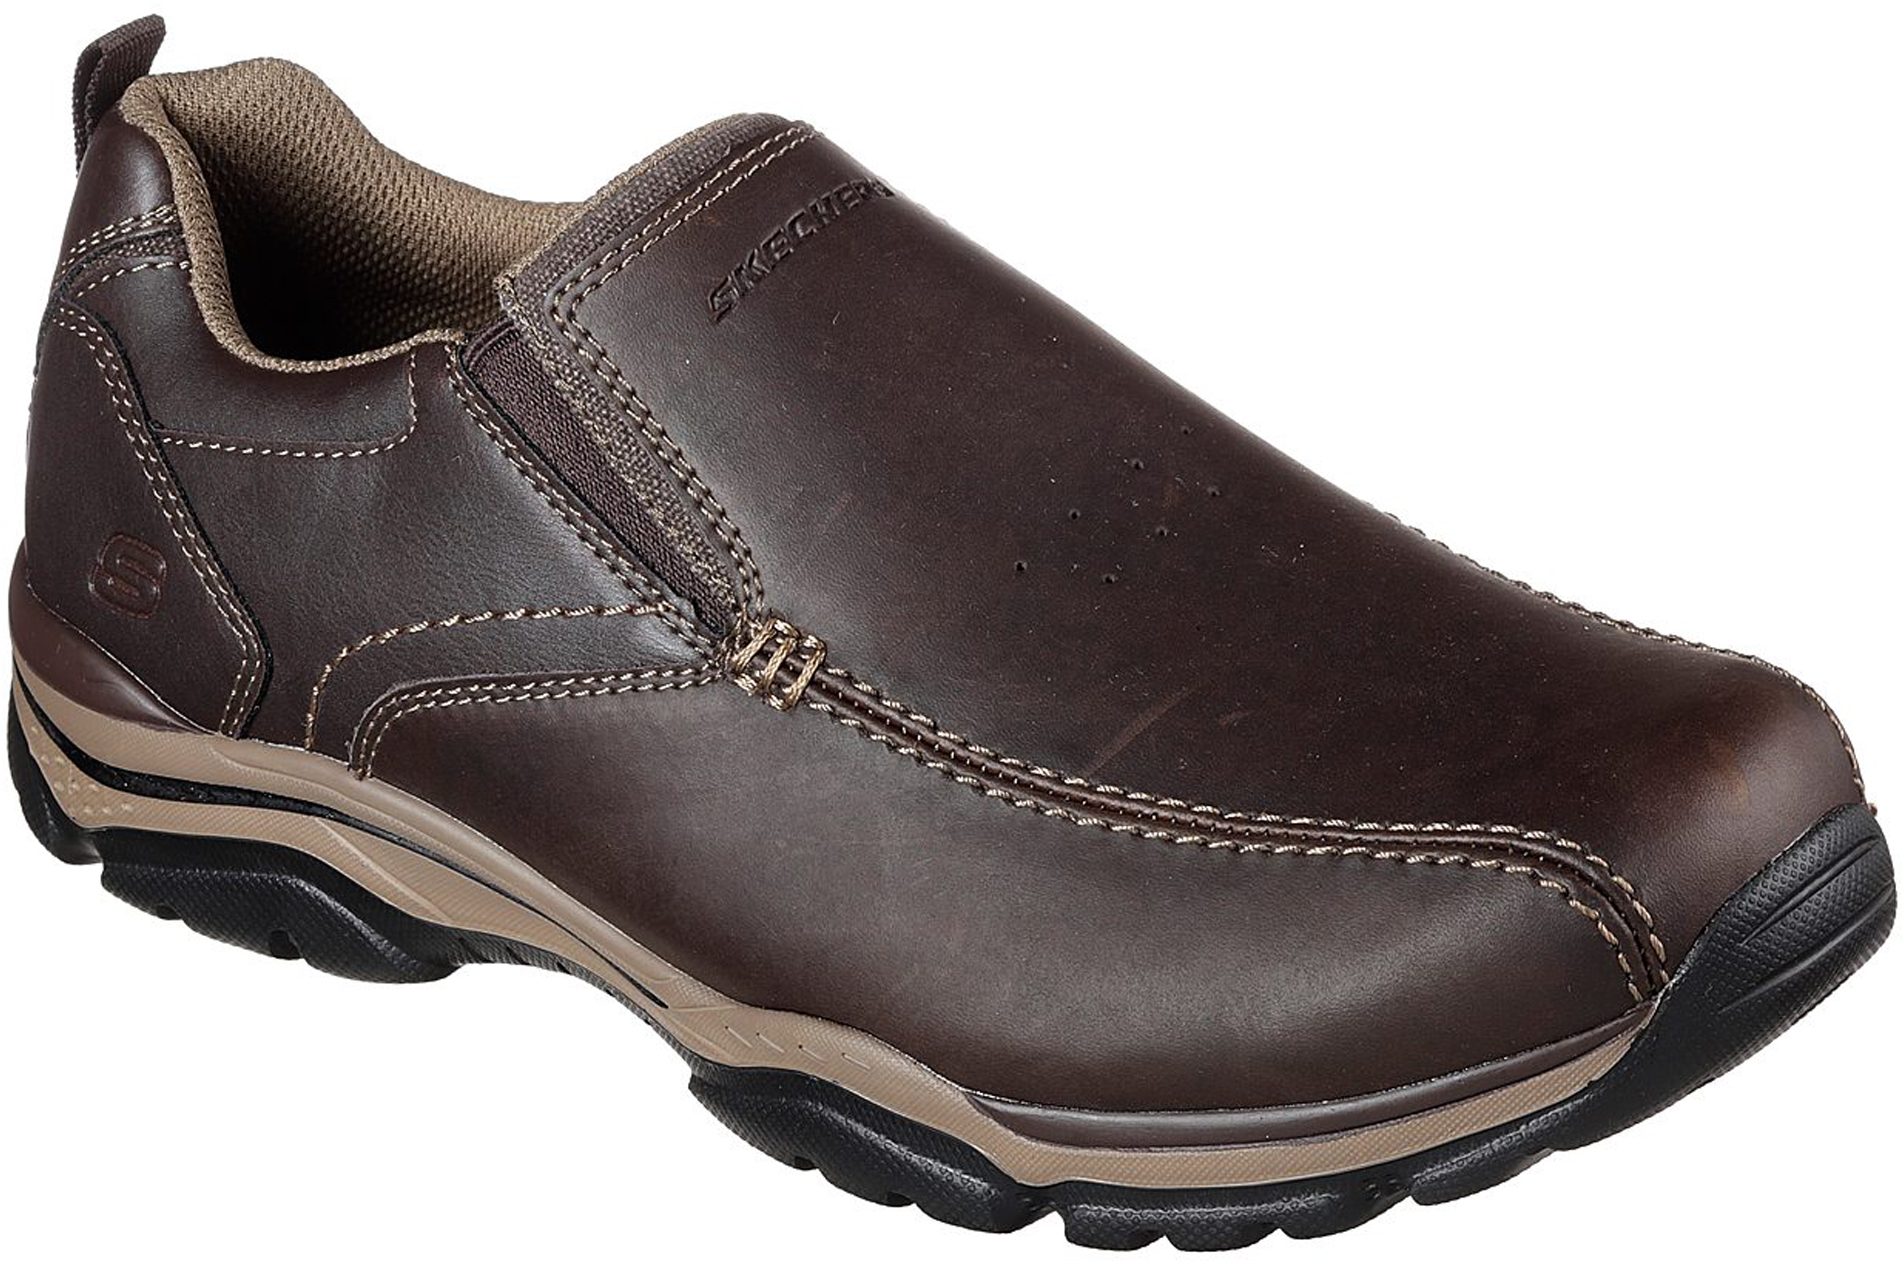 movimiento Tanzania Atrevimiento Skechers Relaxed Fit: Rovato - Venten Dark Brown 65415 DKBR - Casual Shoes  - Humphries Shoes